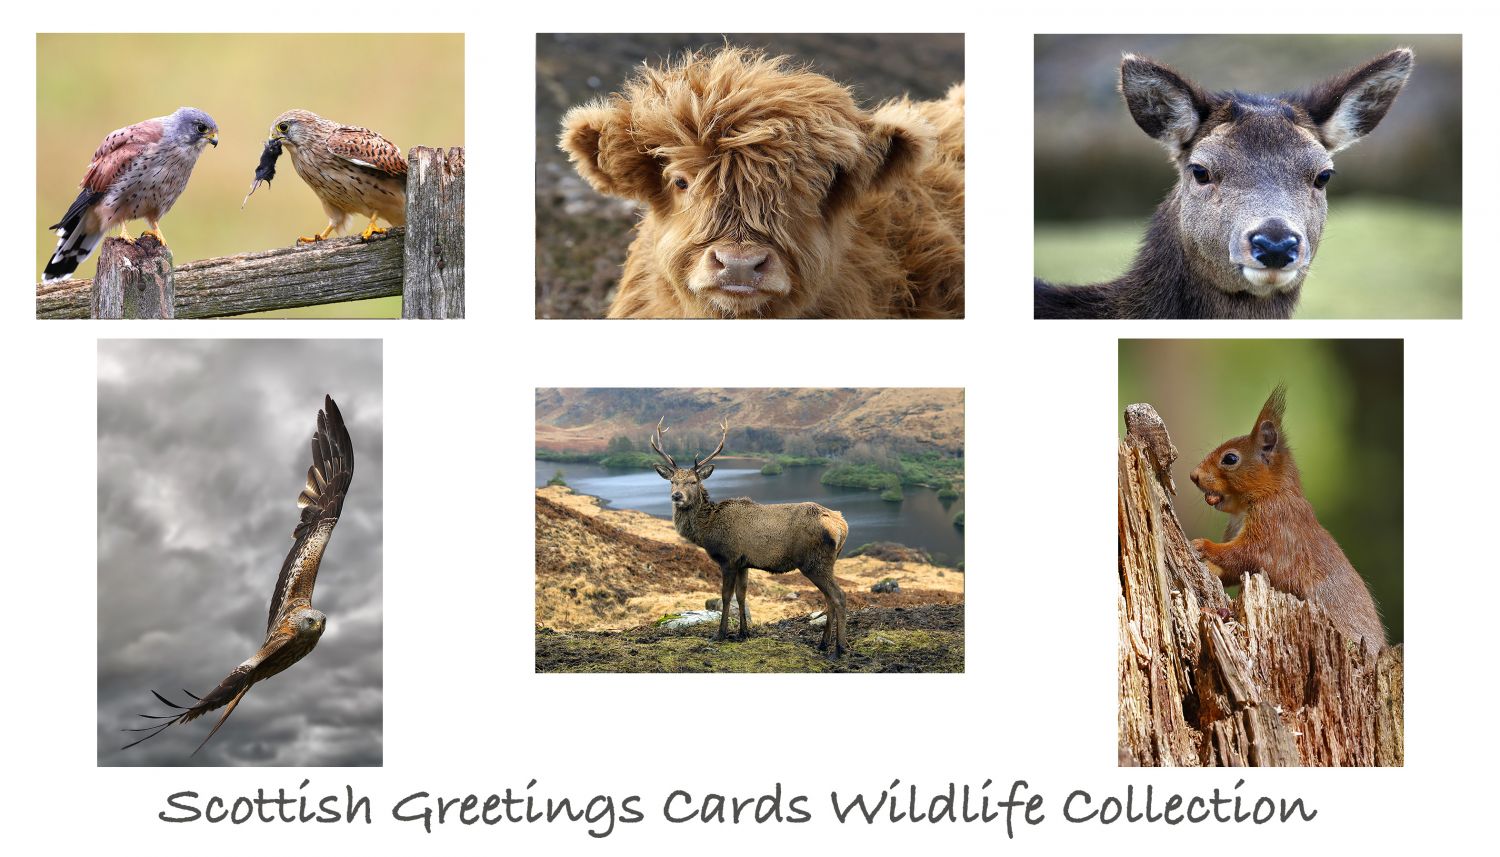 Scottish Greetings Cards Wildlife Collection by Martin Lawrence